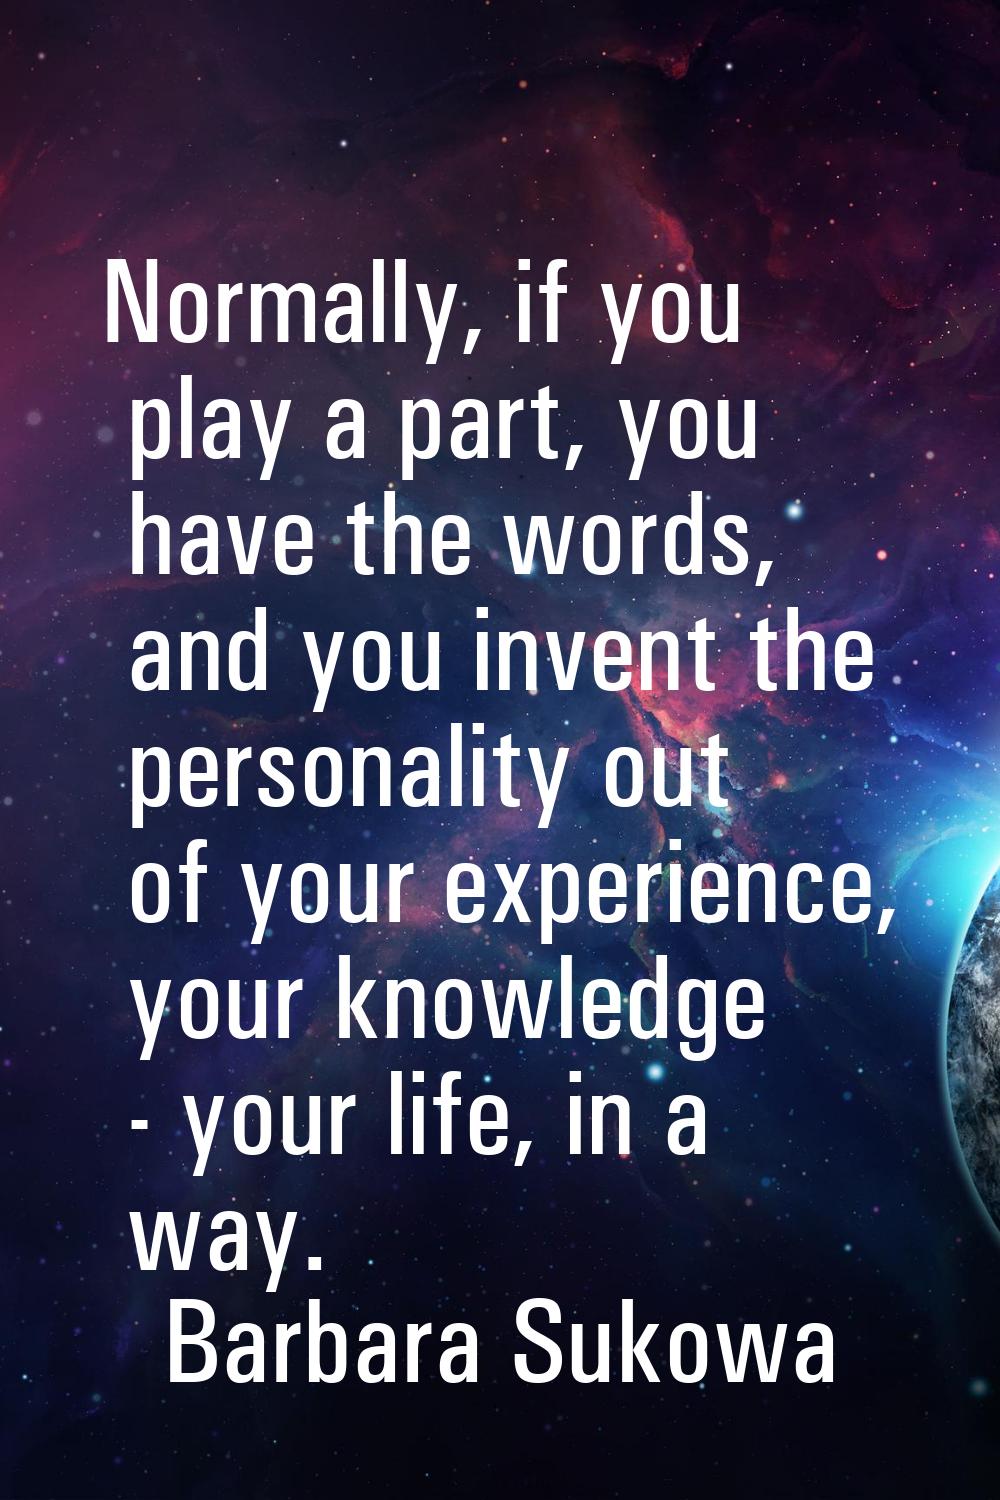 Normally, if you play a part, you have the words, and you invent the personality out of your experi